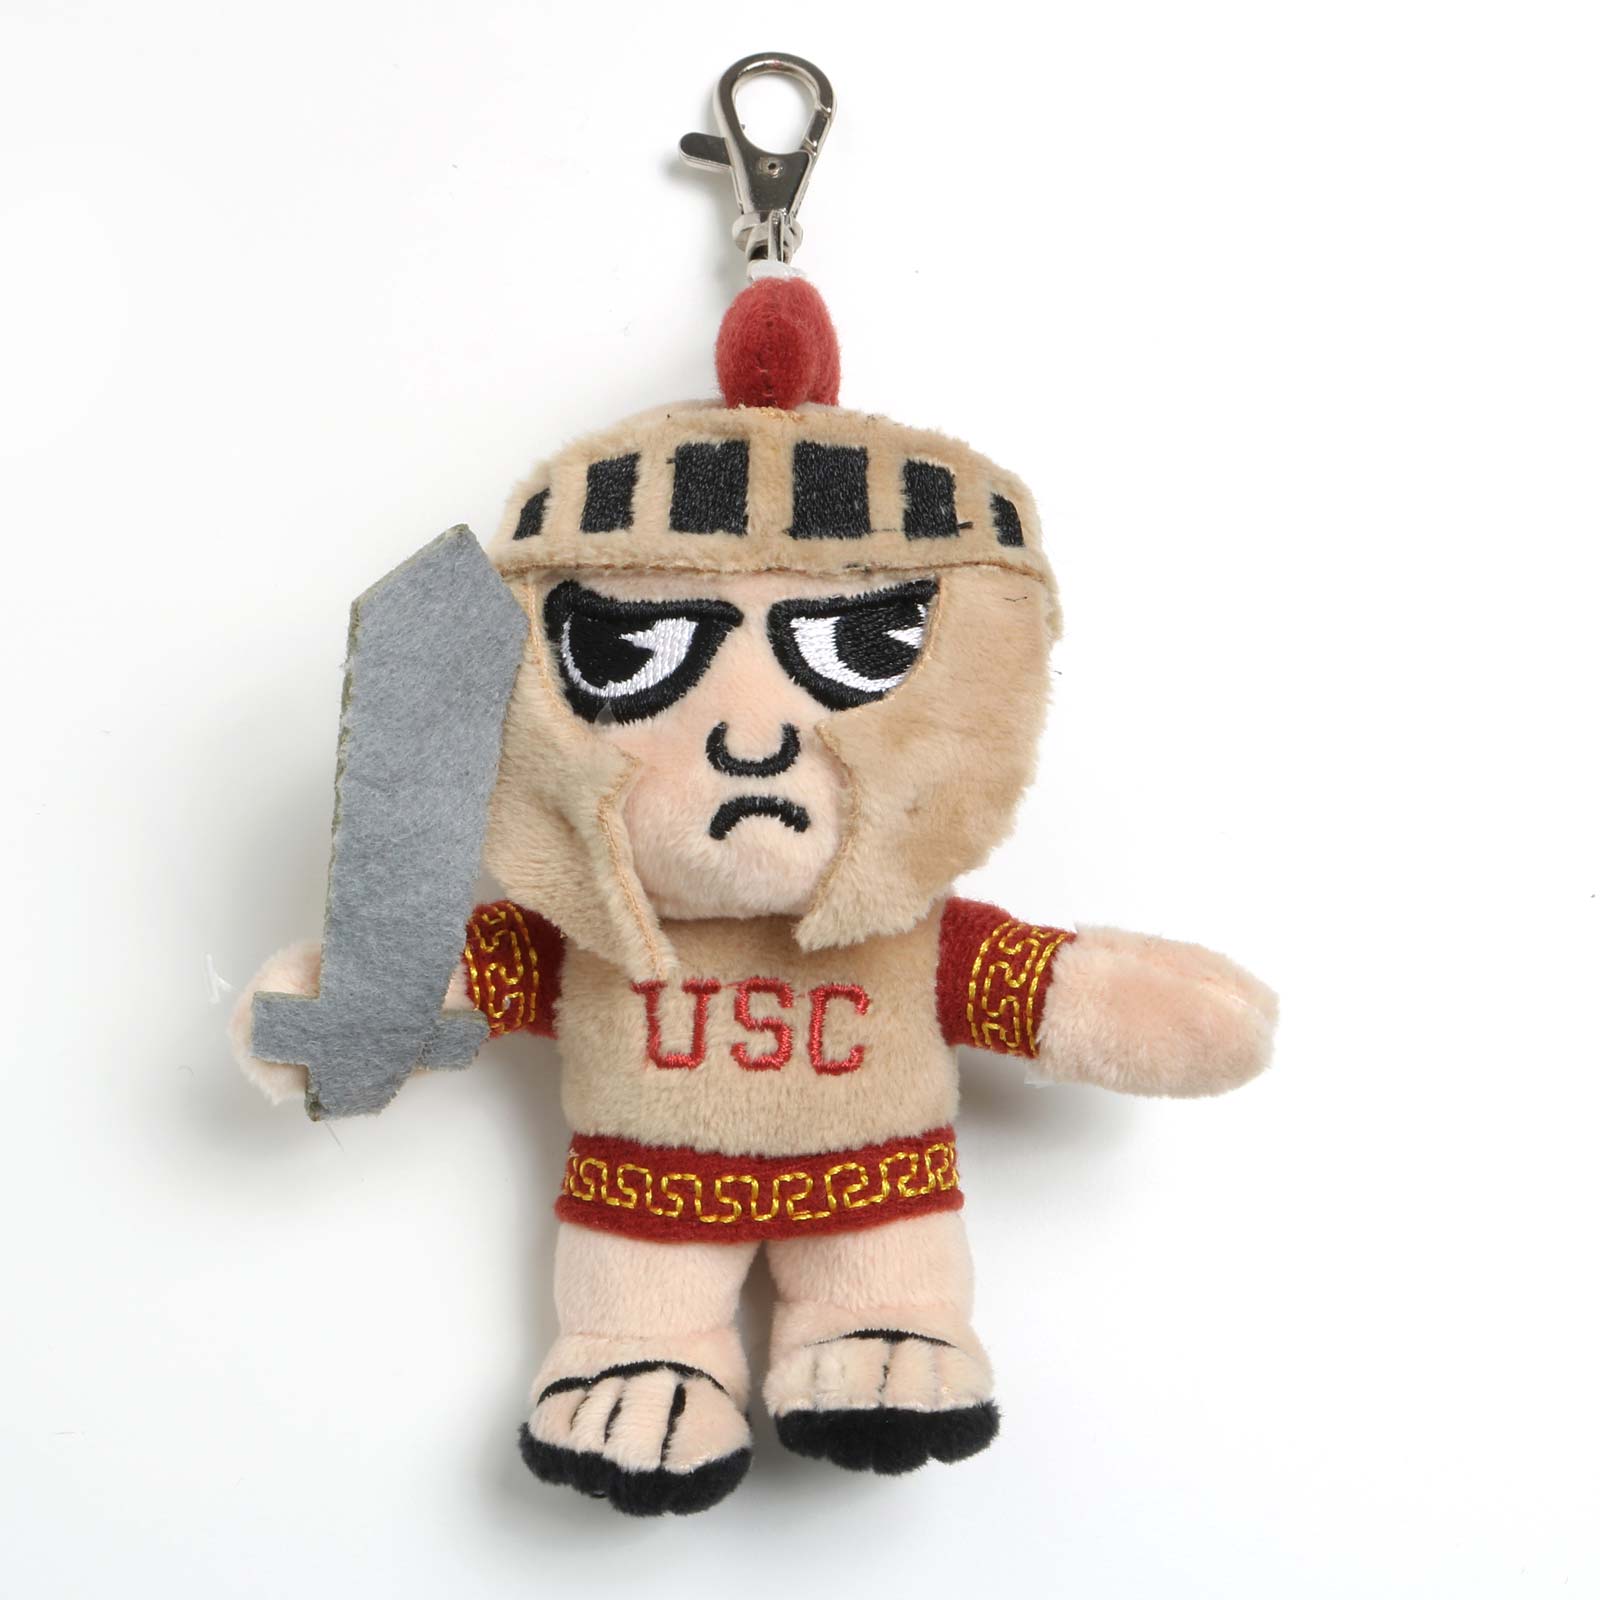 USC Tommy Tokyodachi Keychain by Mascot Factory image01